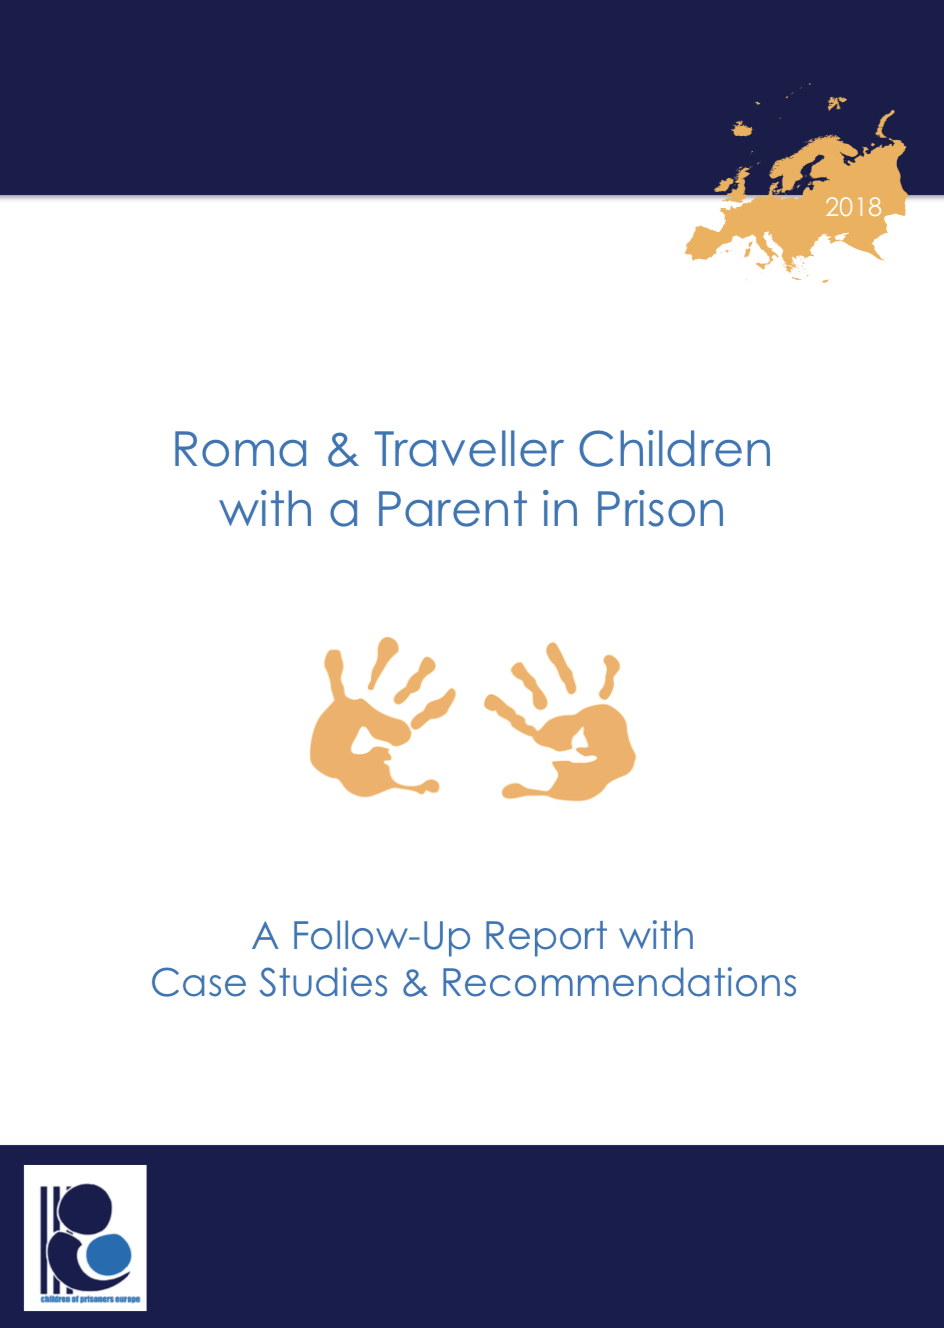 Roma & Traveller Children with a Parent in Prison: Follow-up Report (2018)